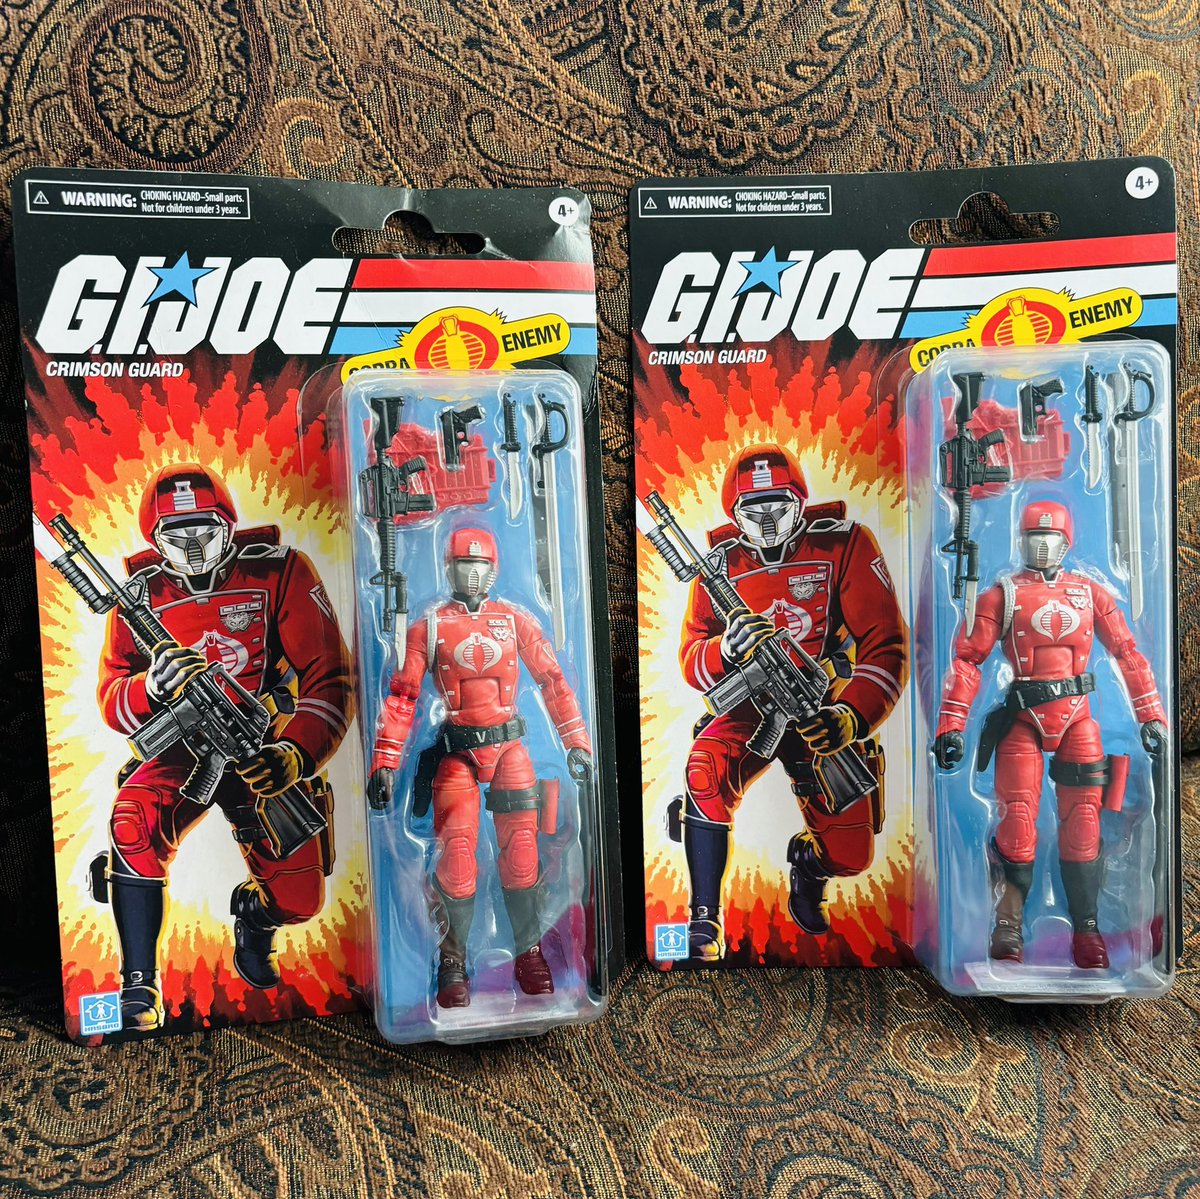 Y’all are probably tired of pics of me so here’s some Crimson Guardsmen! I can’t have just 1.  #actionfigure #actionfigures #toy #toys #toycollector #toycollectors #femalecollector #crimsonguard #gijoe #cobra